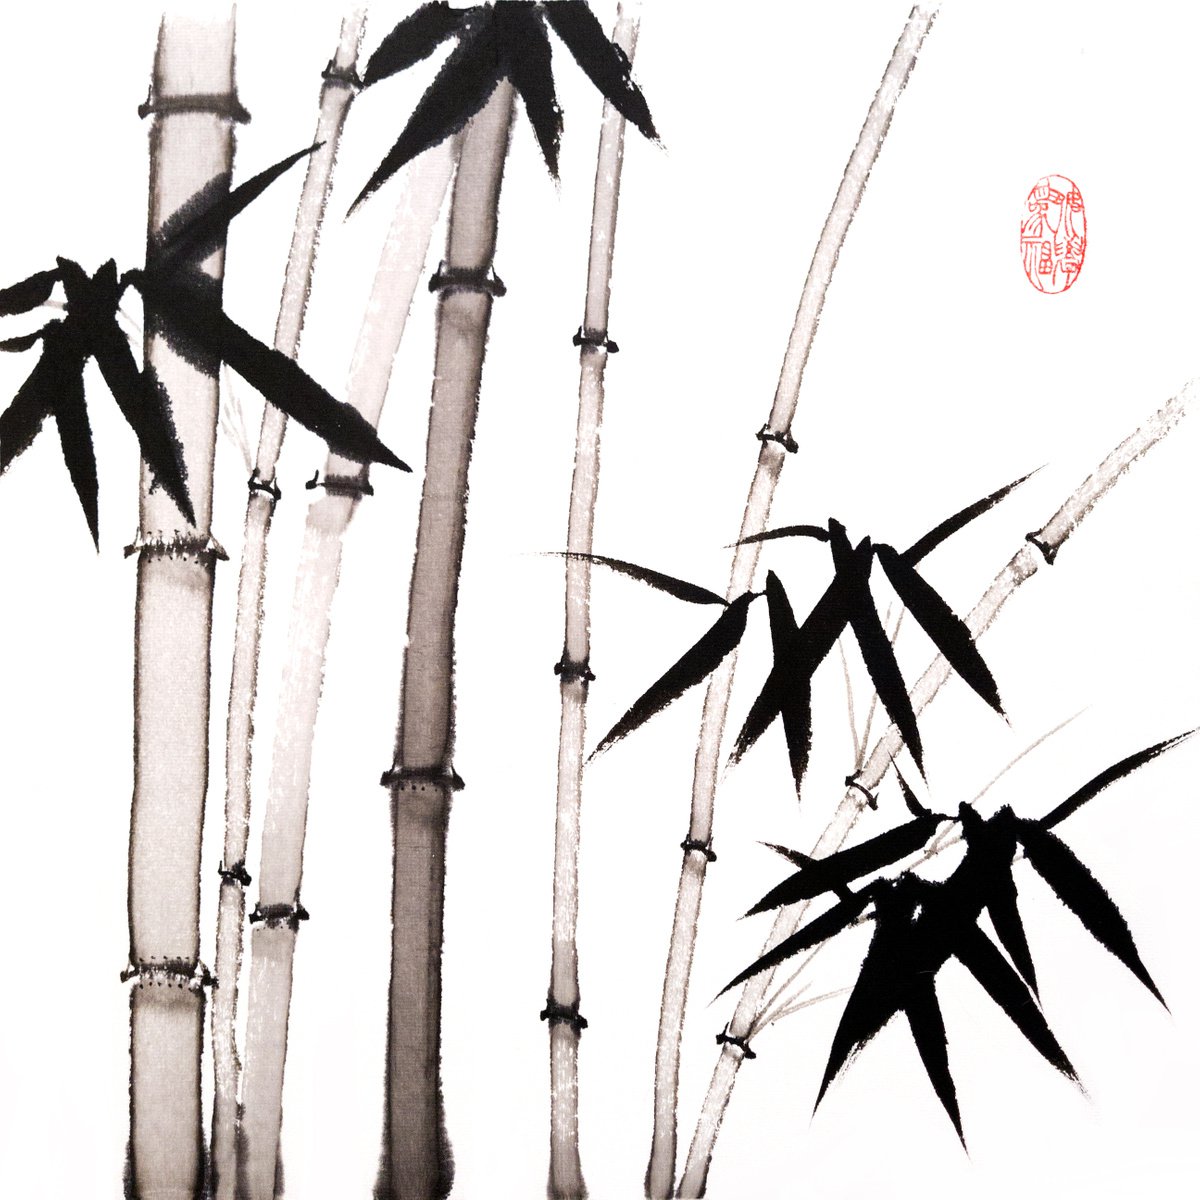 Bamboo forest - Bamboo series No. 2124 - Oriental Chinese Ink Painting by Ilana Shechter